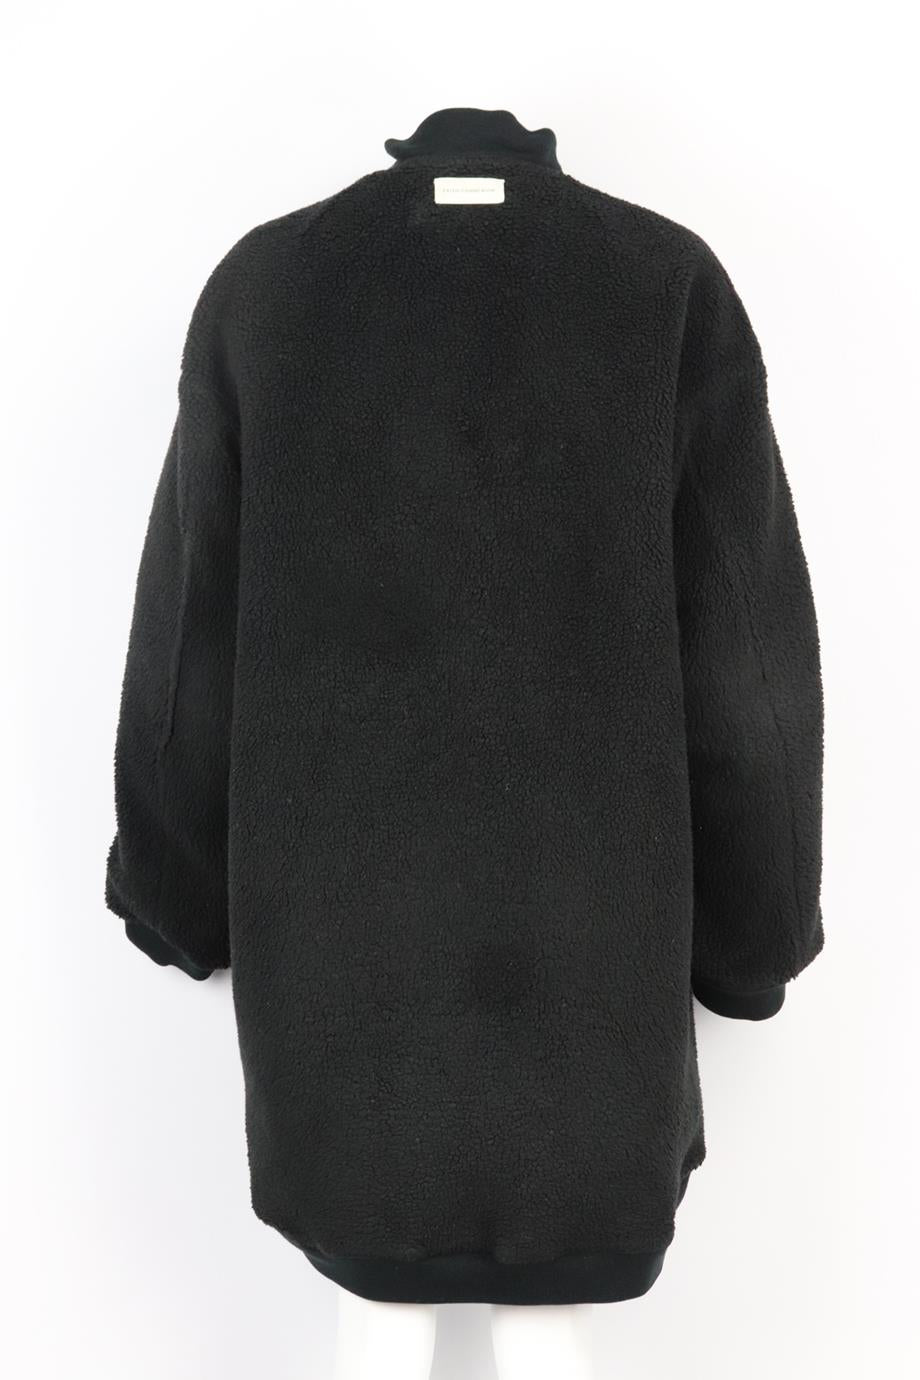 FAITH CONNEXION OVERSIZED REVERSIBLE FAUX SHEARLING AND SATIN COAT XSMALL